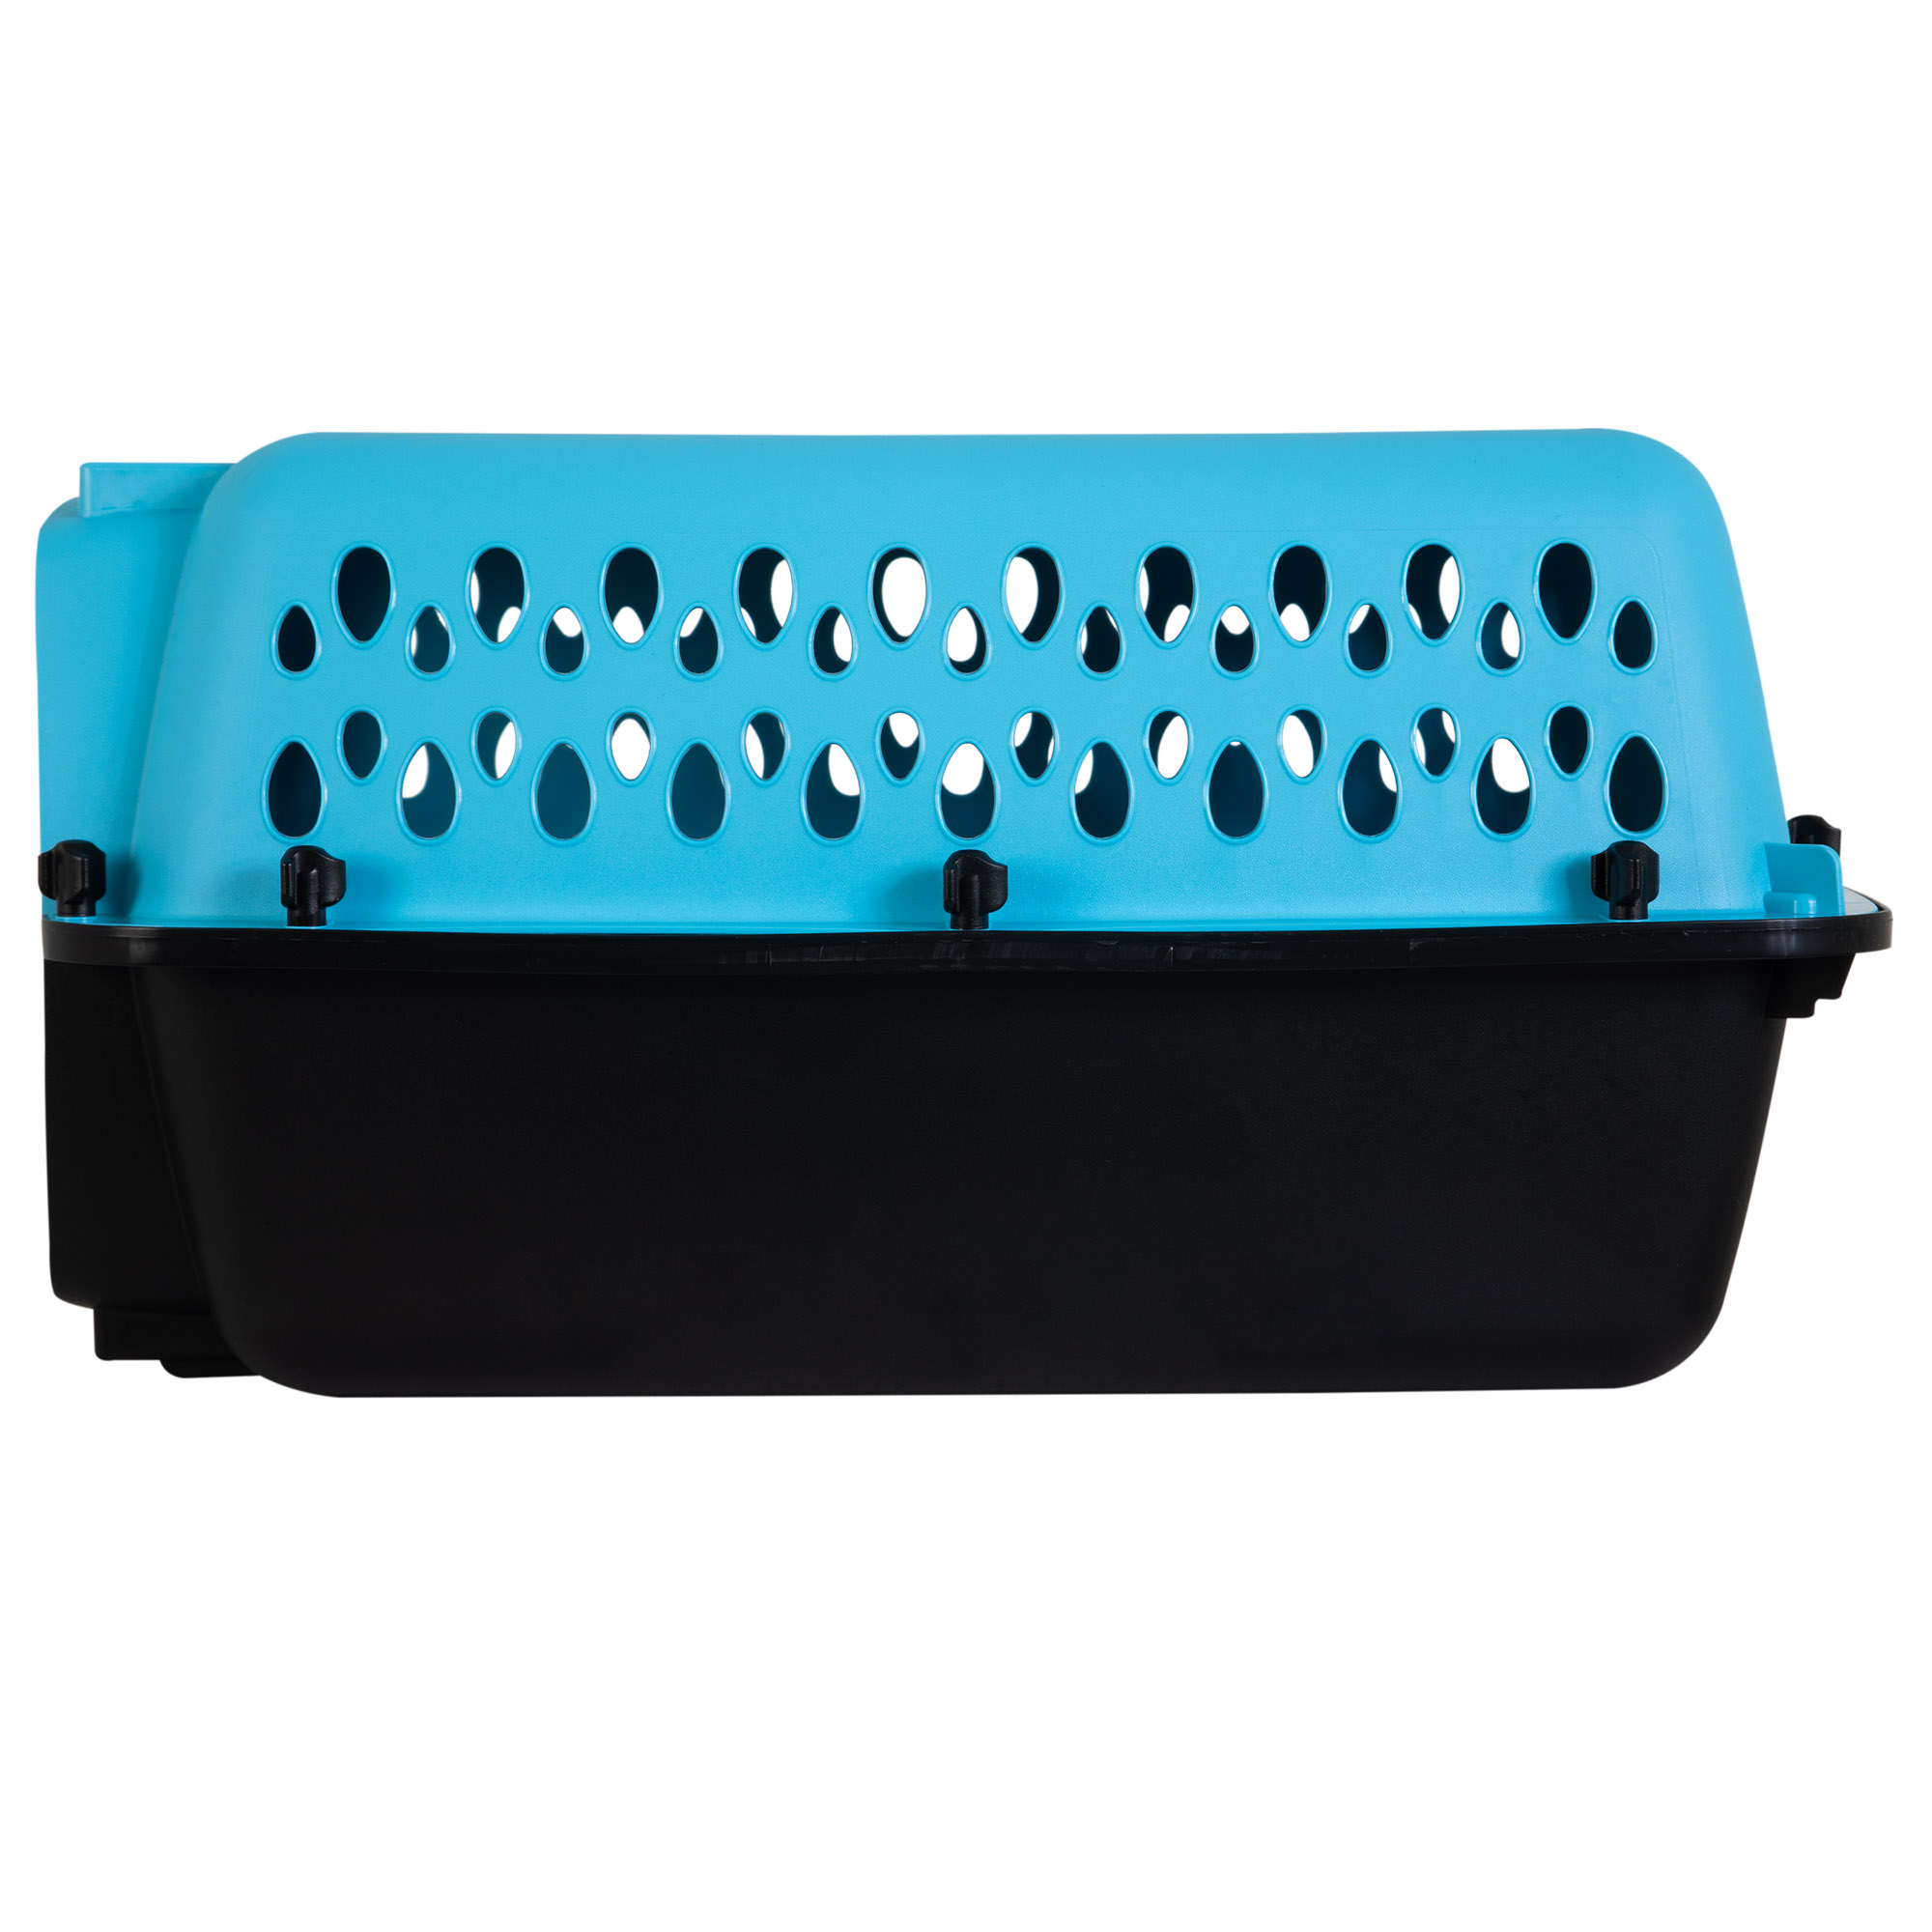 Petmate Pet Porter 19" Travel Fashion Dog Kennel Portable Small Pet Carrier for Dogs Upto 10 lb, Blue - image 2 of 8